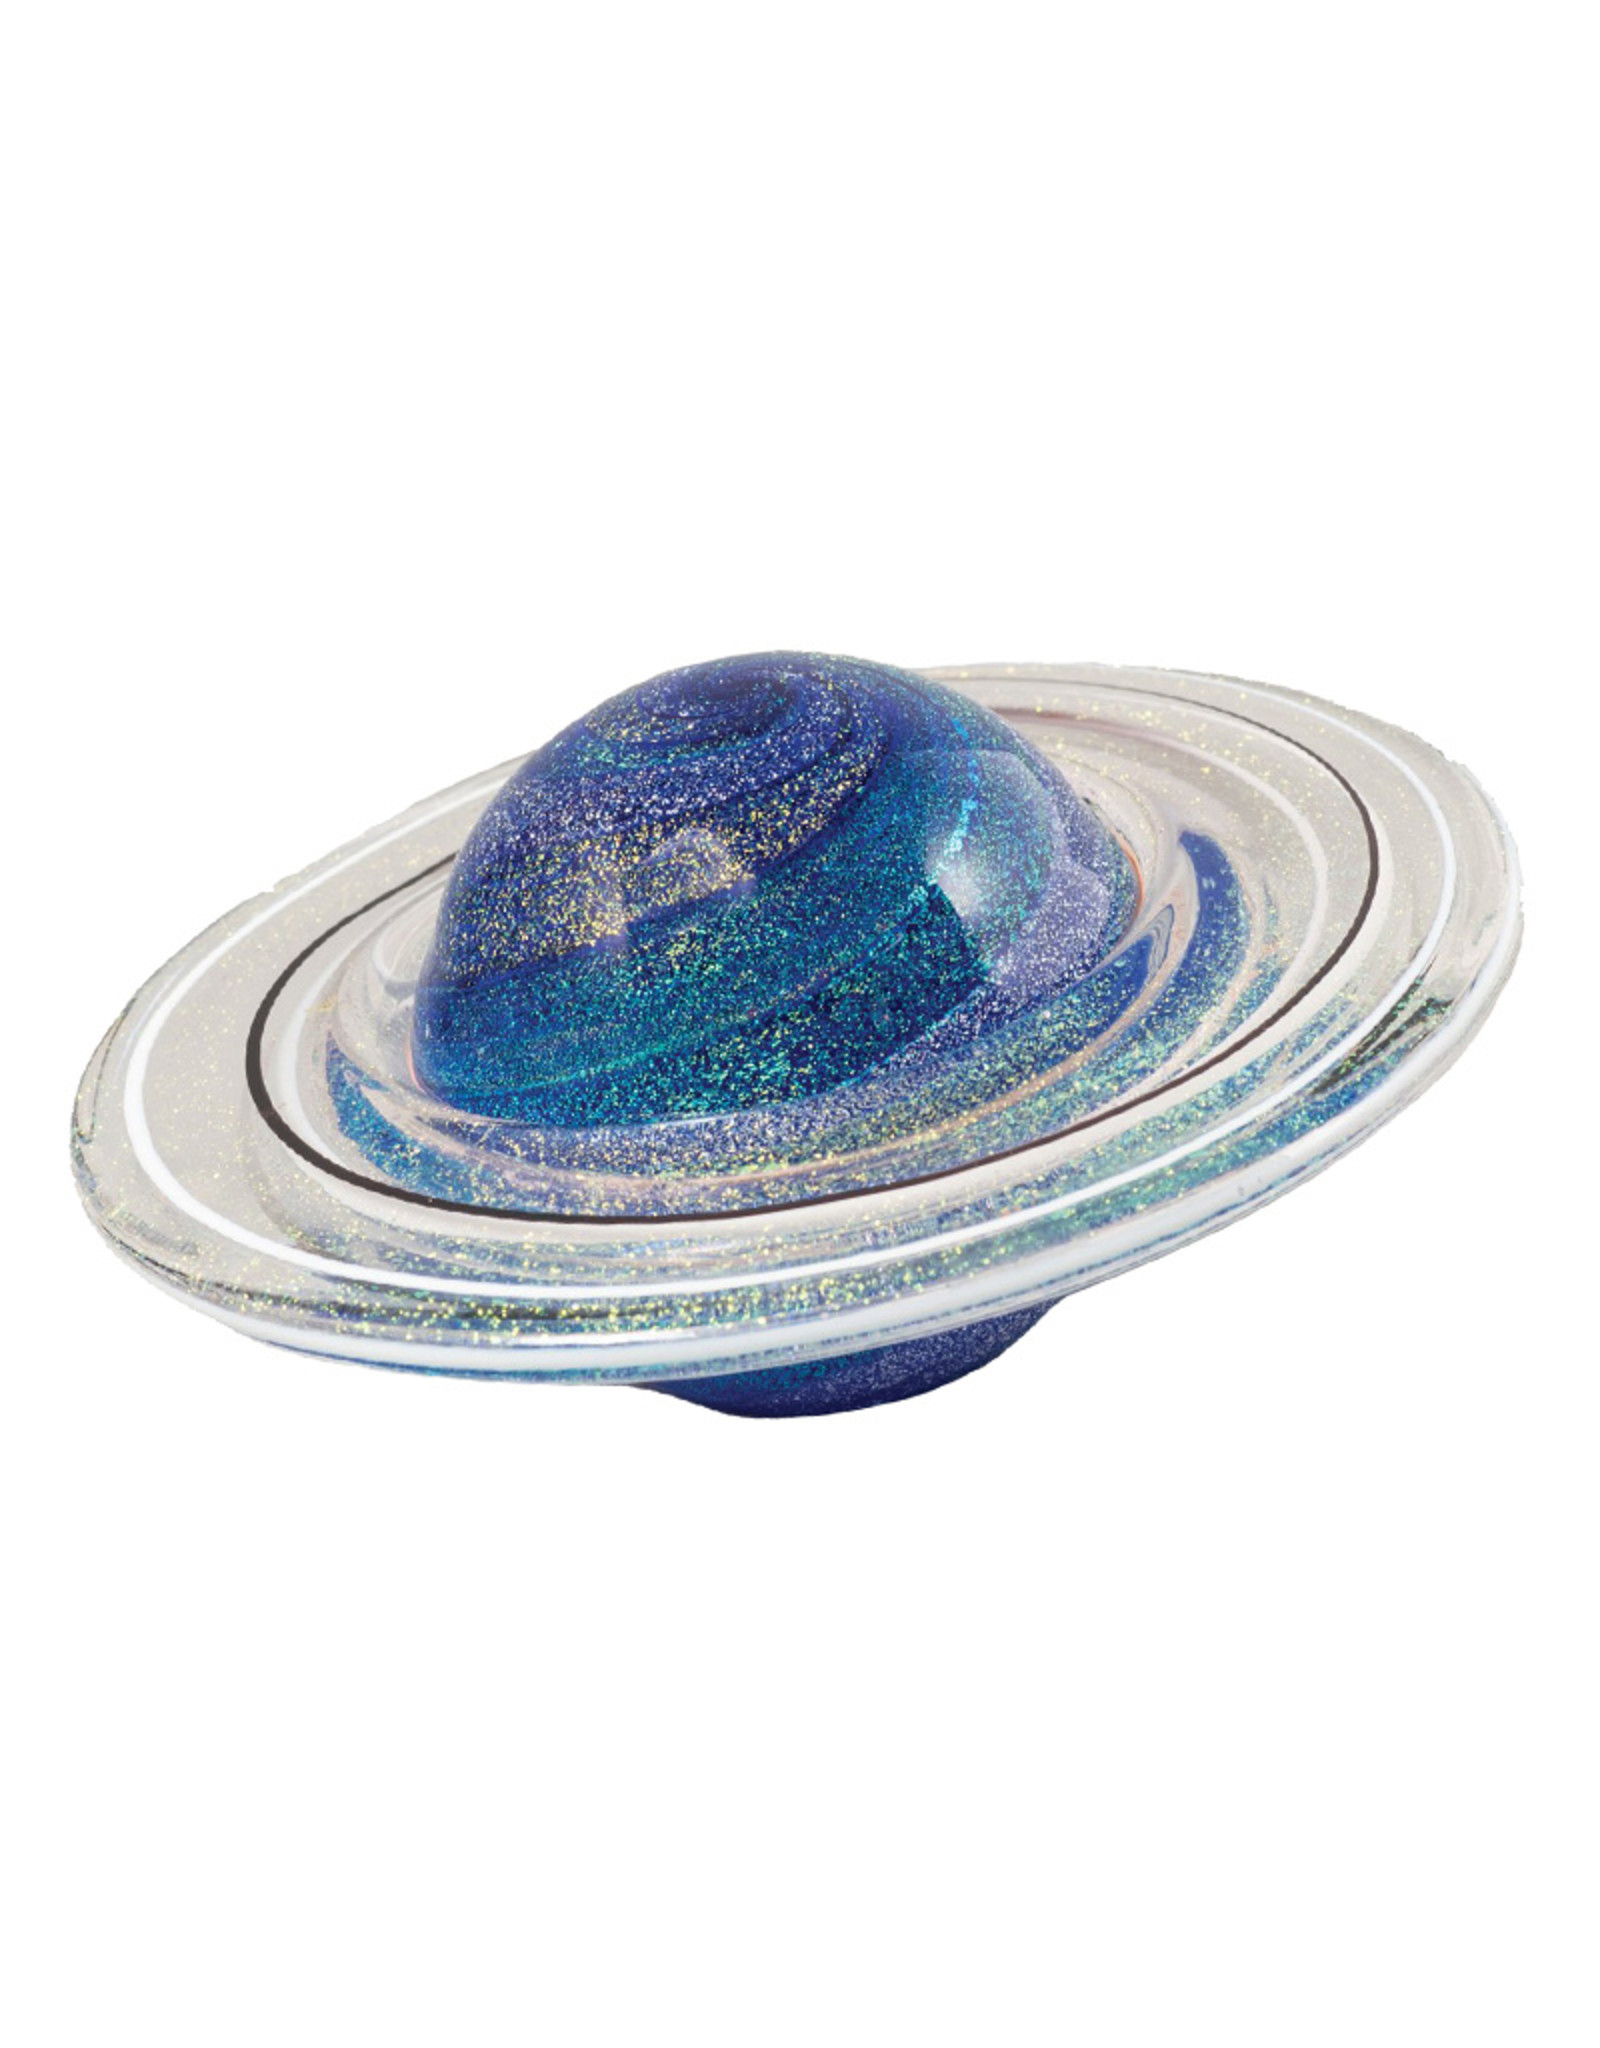 GLASS EYE RINGS OF SATURN PLANETARY PAPERWEIGHT